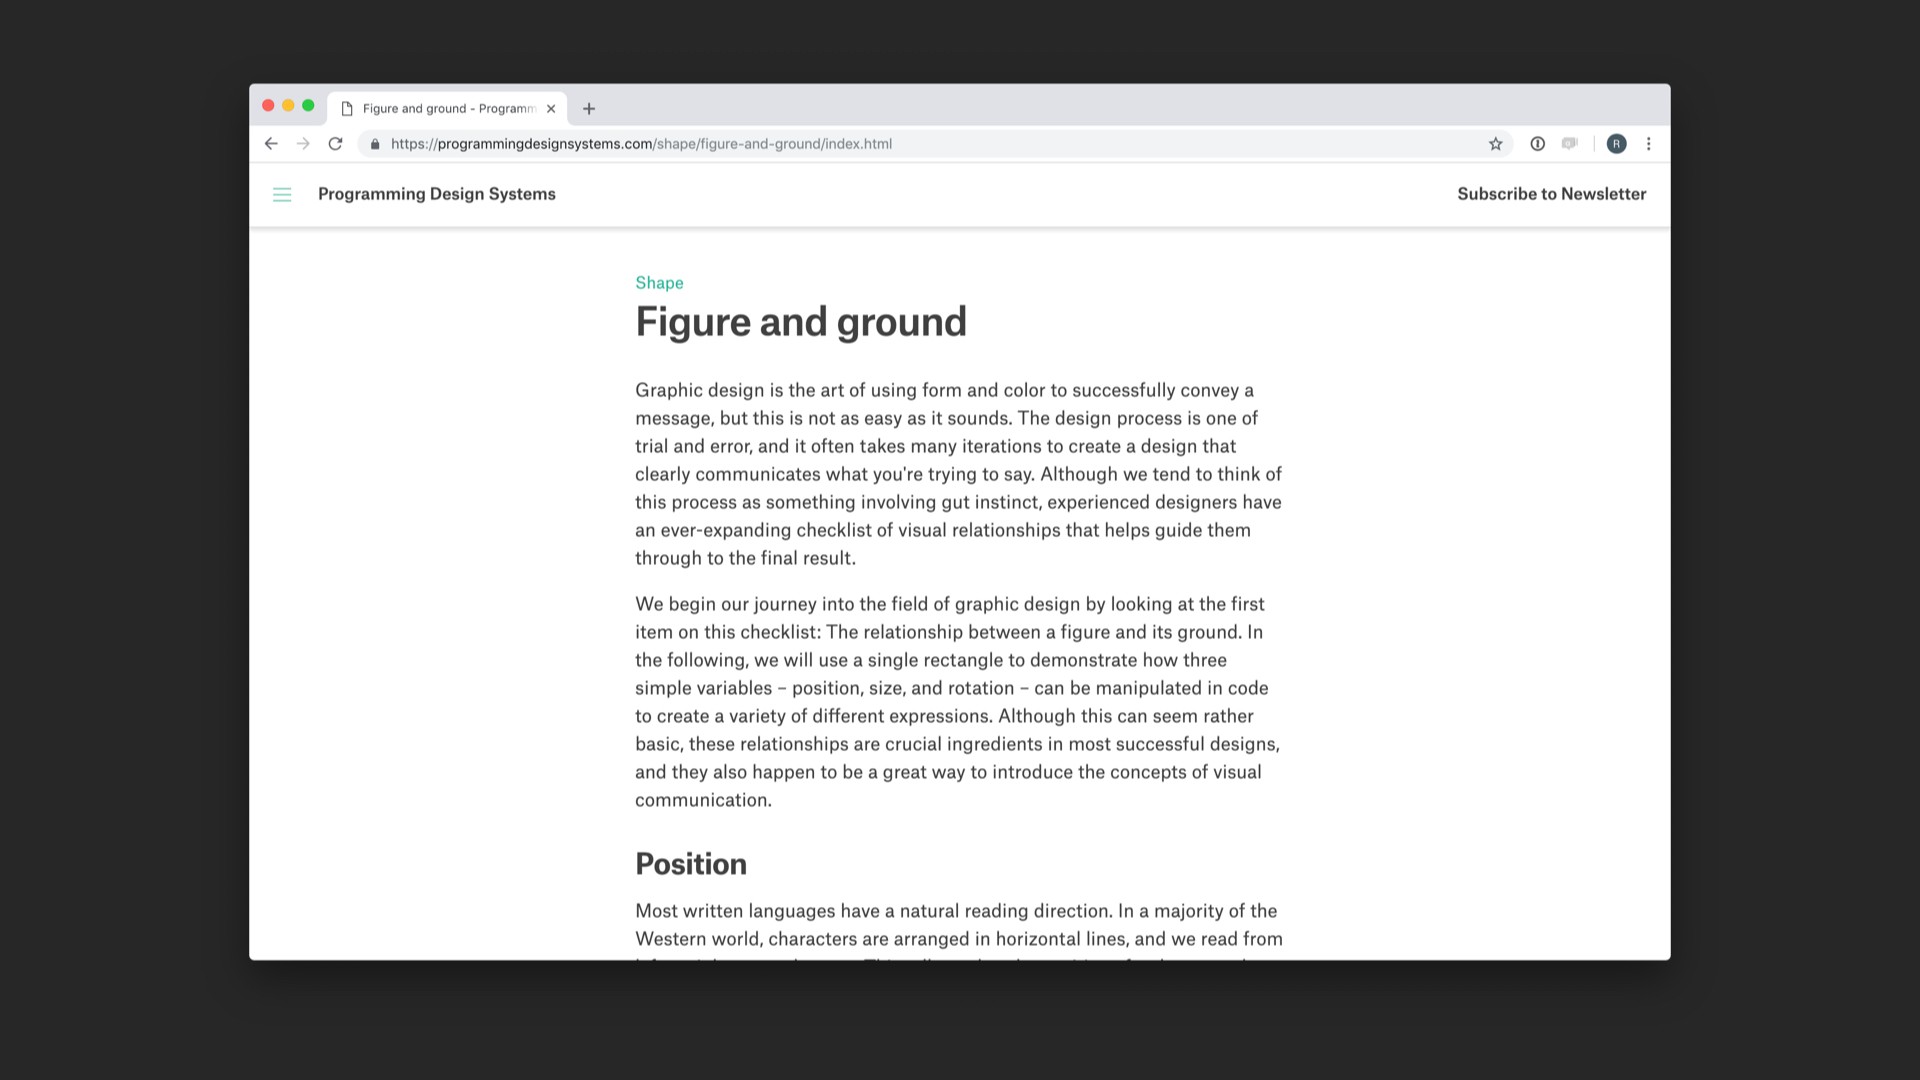 Screenshot of 'Figure and ground' chapter of referenced website.